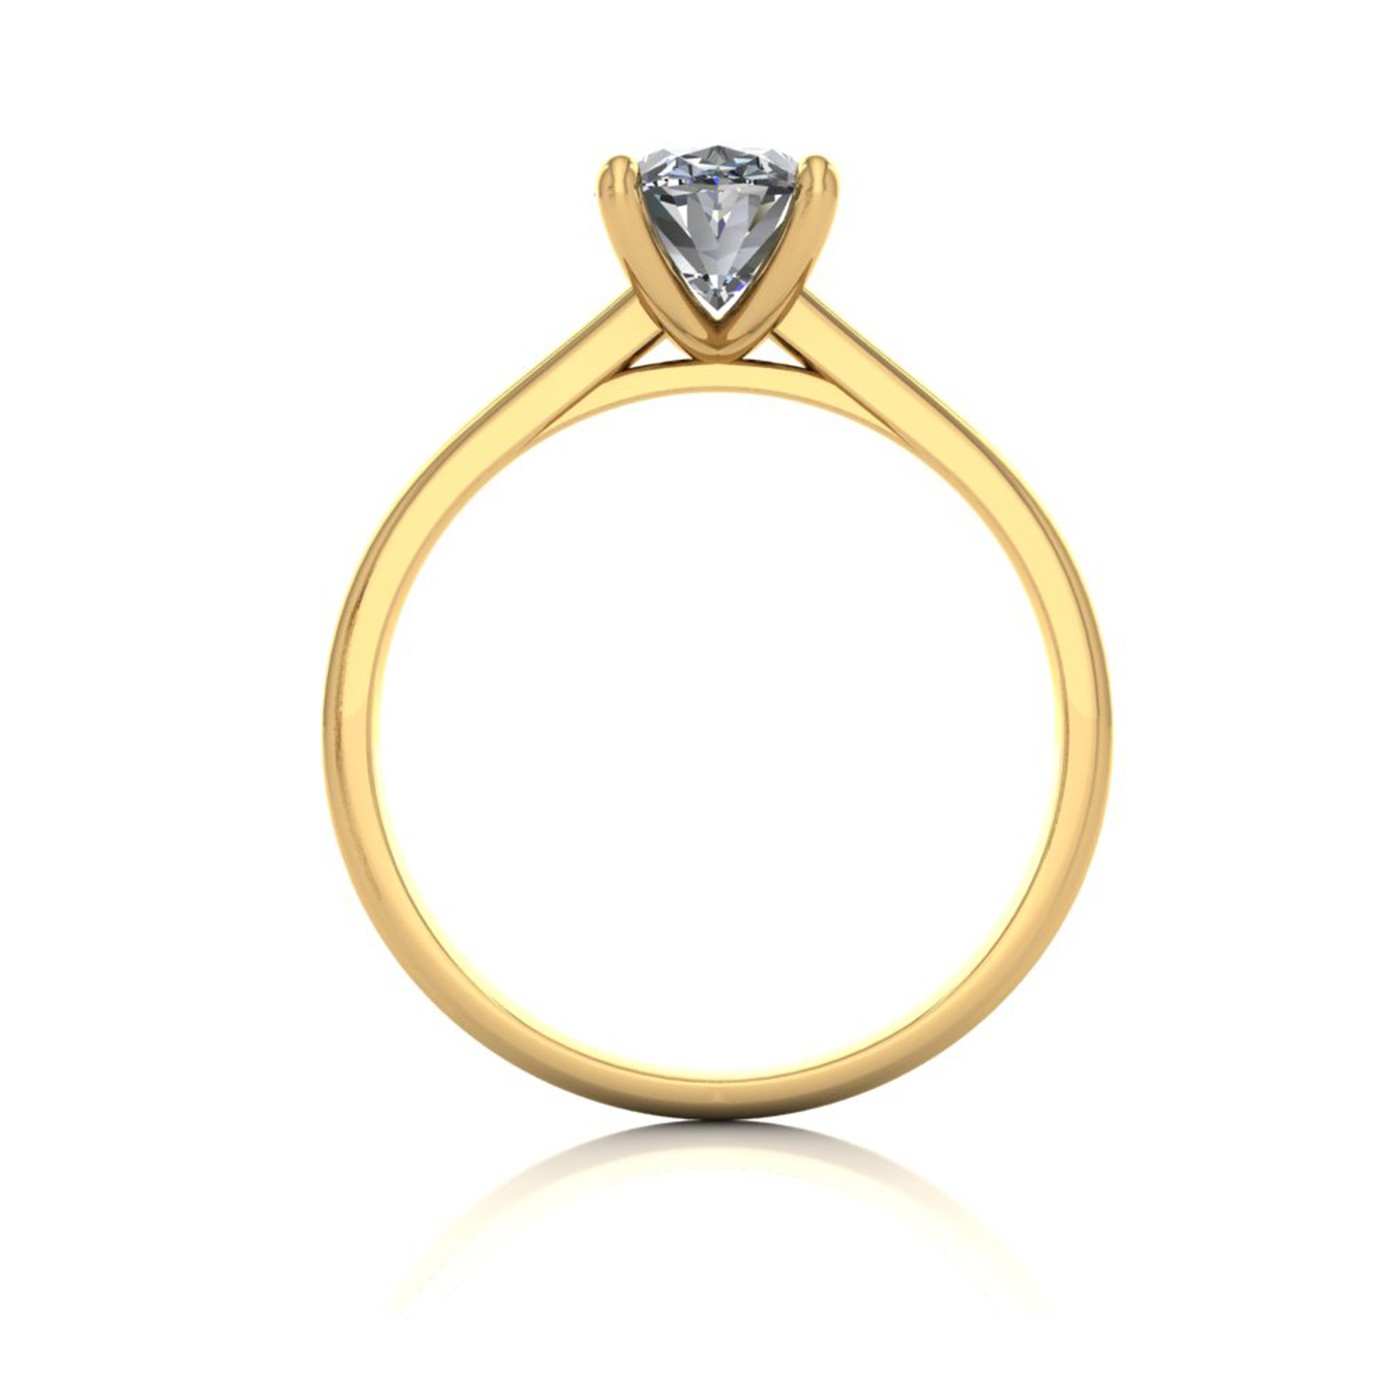 18k yellow gold  1,20 ct 4 prongs solitaire oval cut diamond engagement ring with whisper thin band